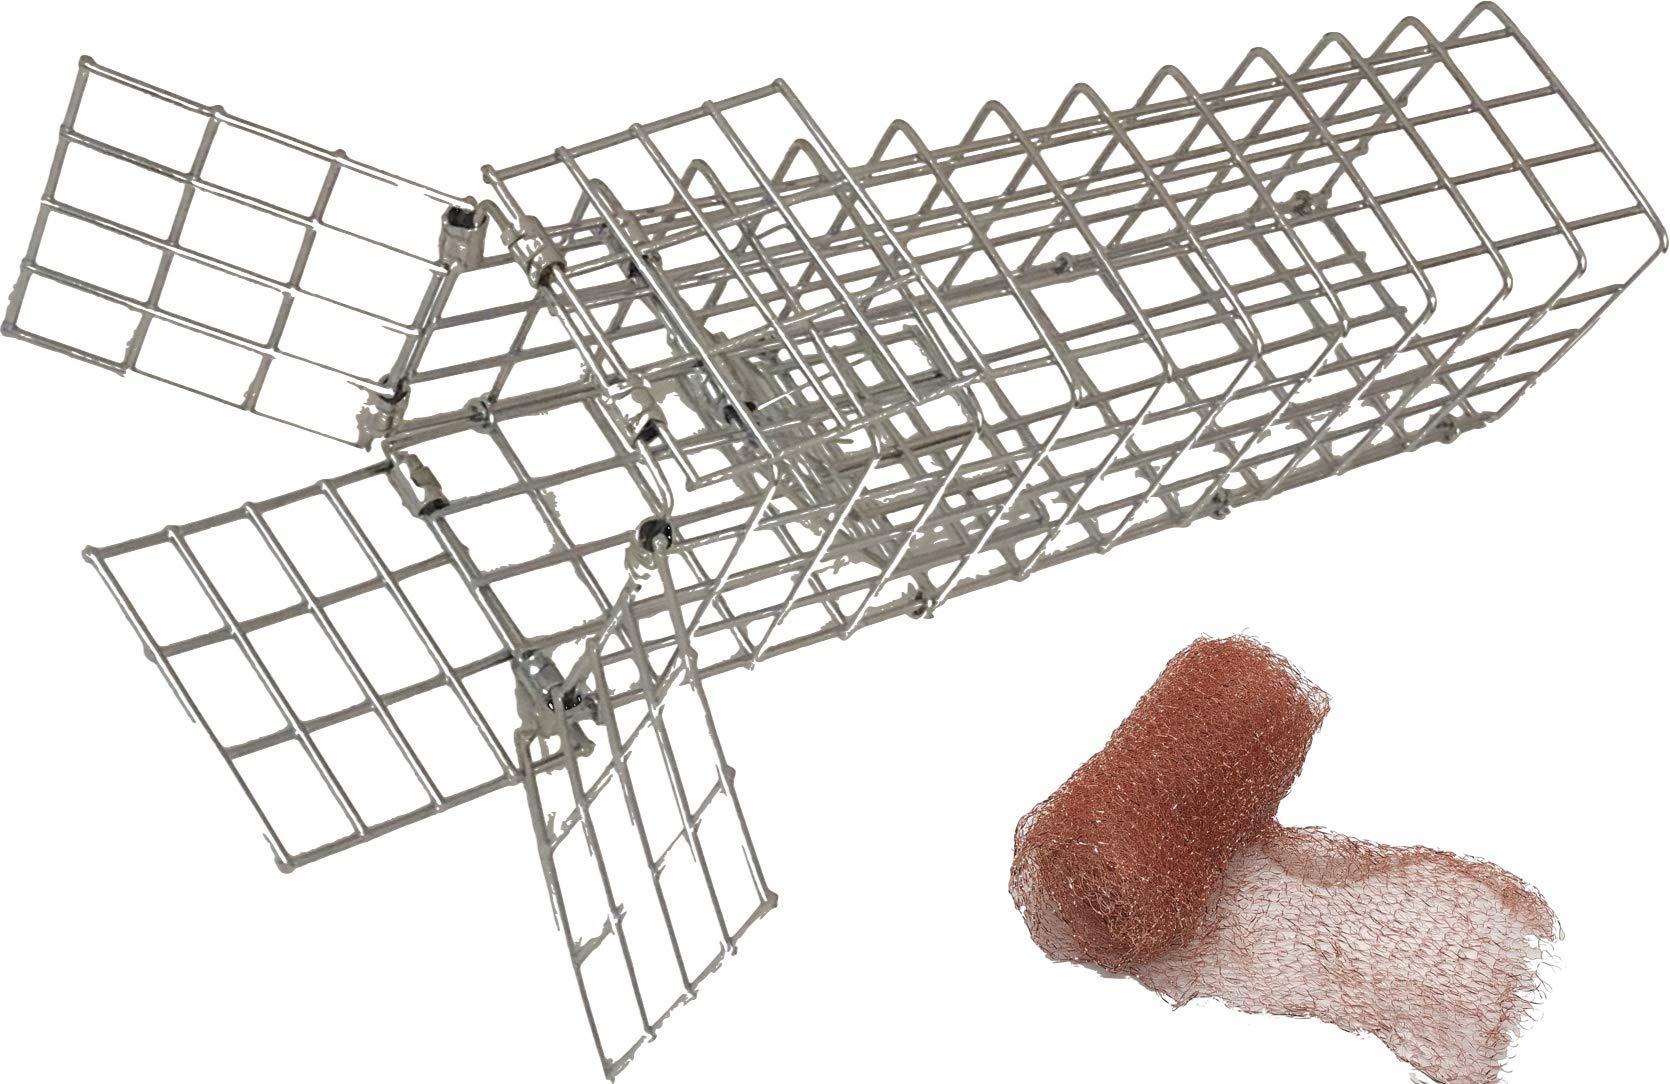 Excluder Pro Excluder One Way Squirrel And Rodent Trap - Control Mice, Rats, Bats, Squirrels And More - Fine Copper Mesh Wool Included To Sea